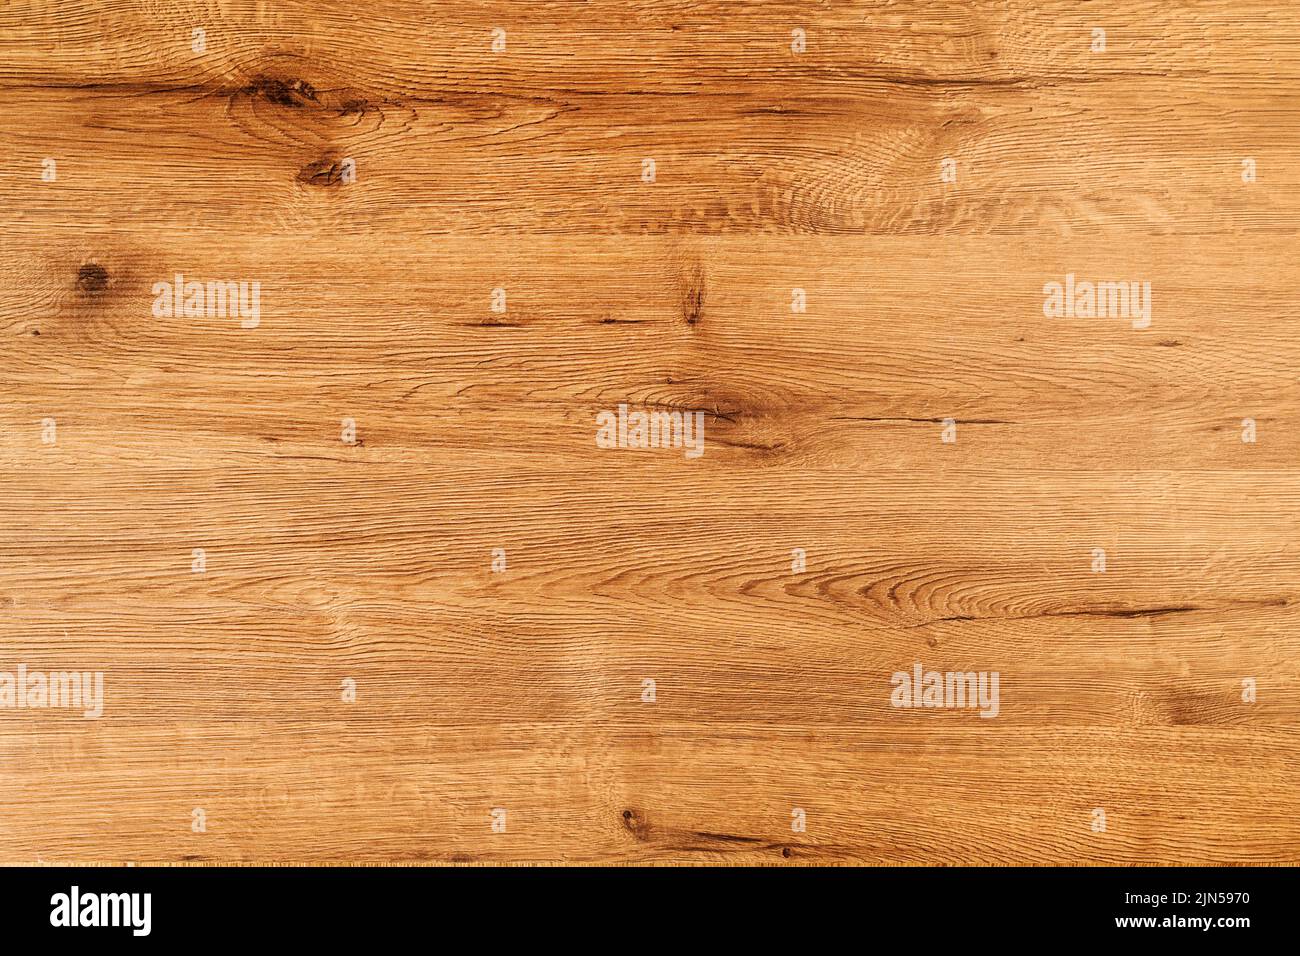 Reclaimed oak wood texture as background, top view of wooden surface Stock Photo